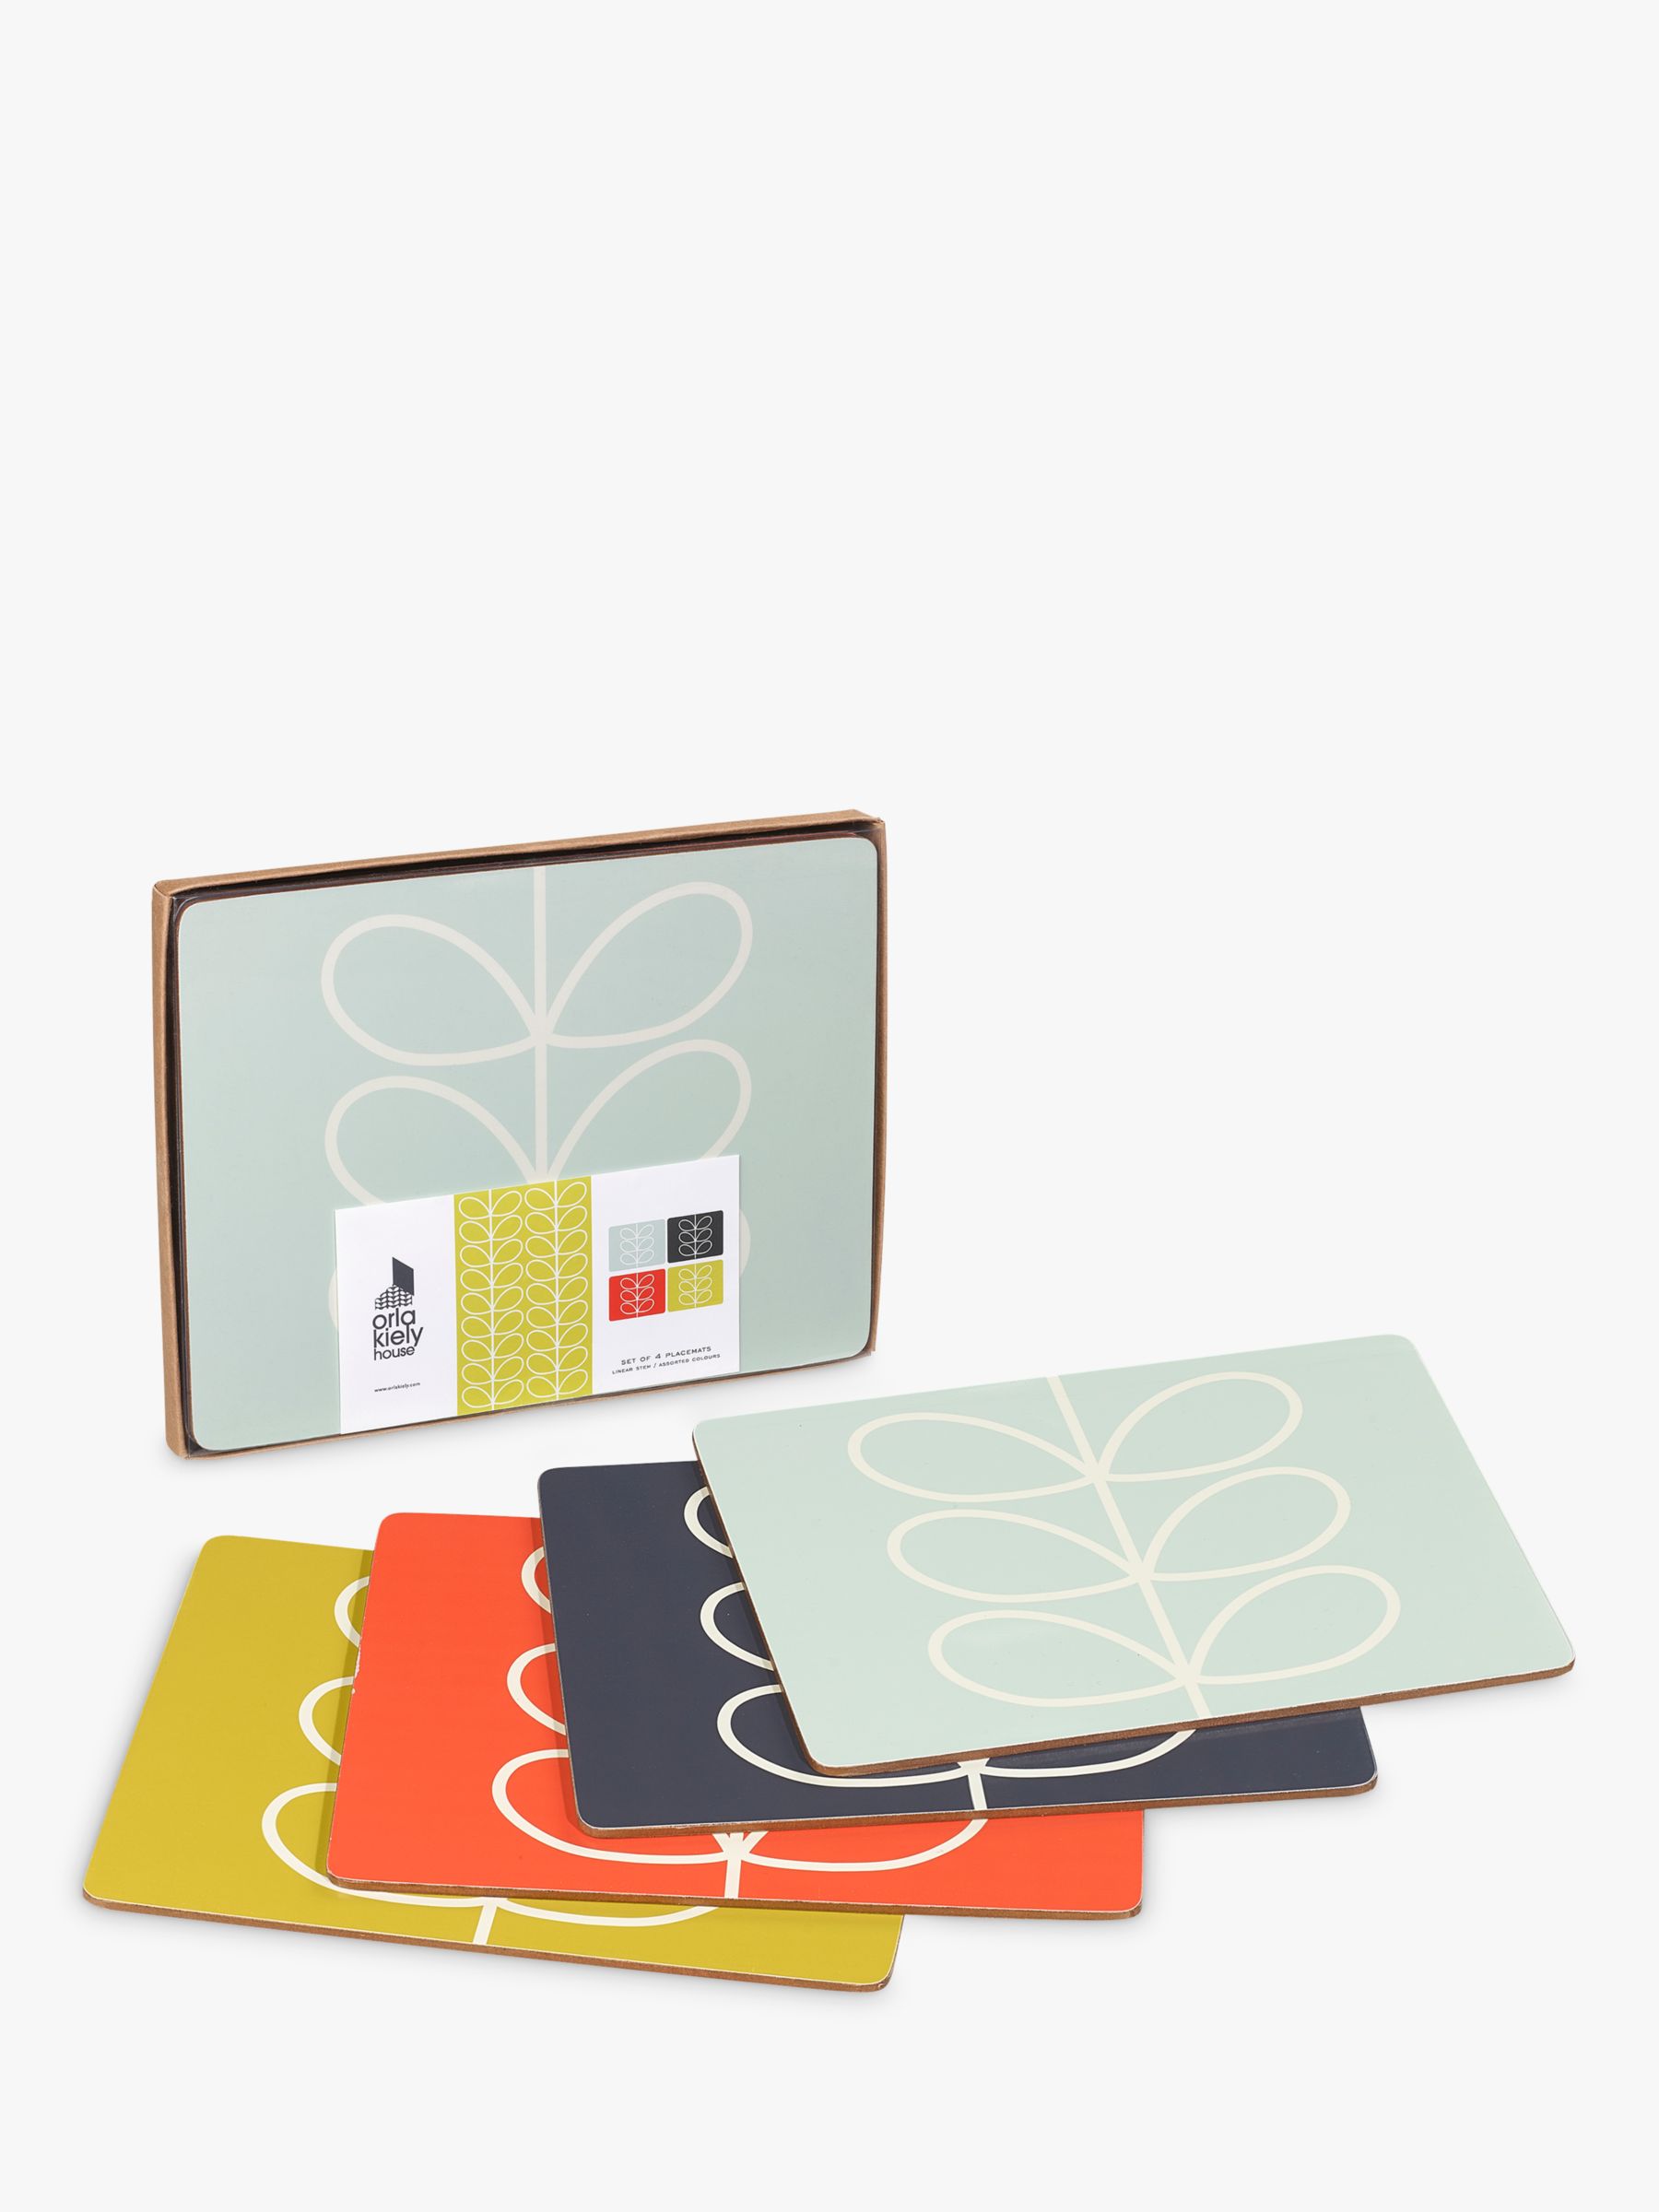 2 SETS OFFICIAL LICENSED ORLA KIELY LINEAR STEM PLACEMATS & COASTERS BOXED 